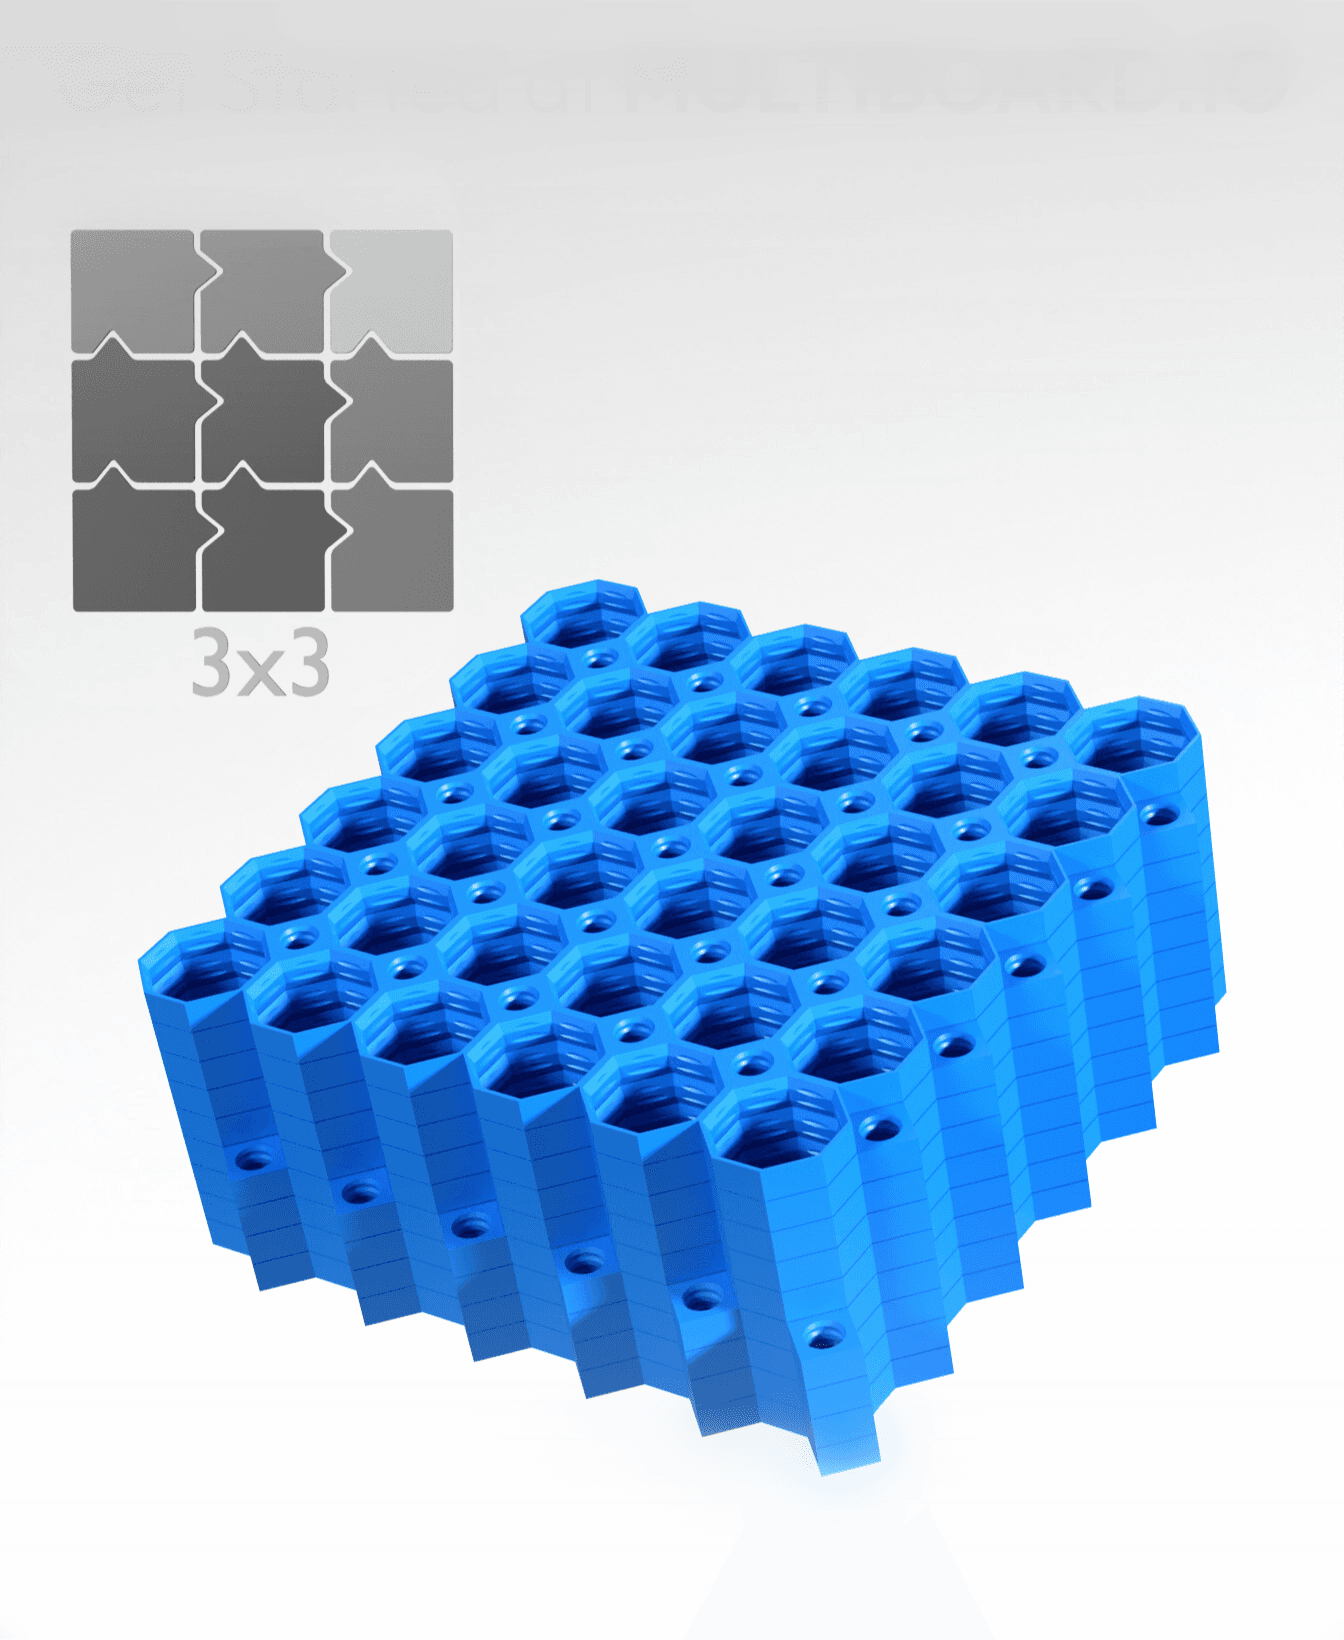 6x6 Tiles - 3x3 Board - Ironing Stack 3d model